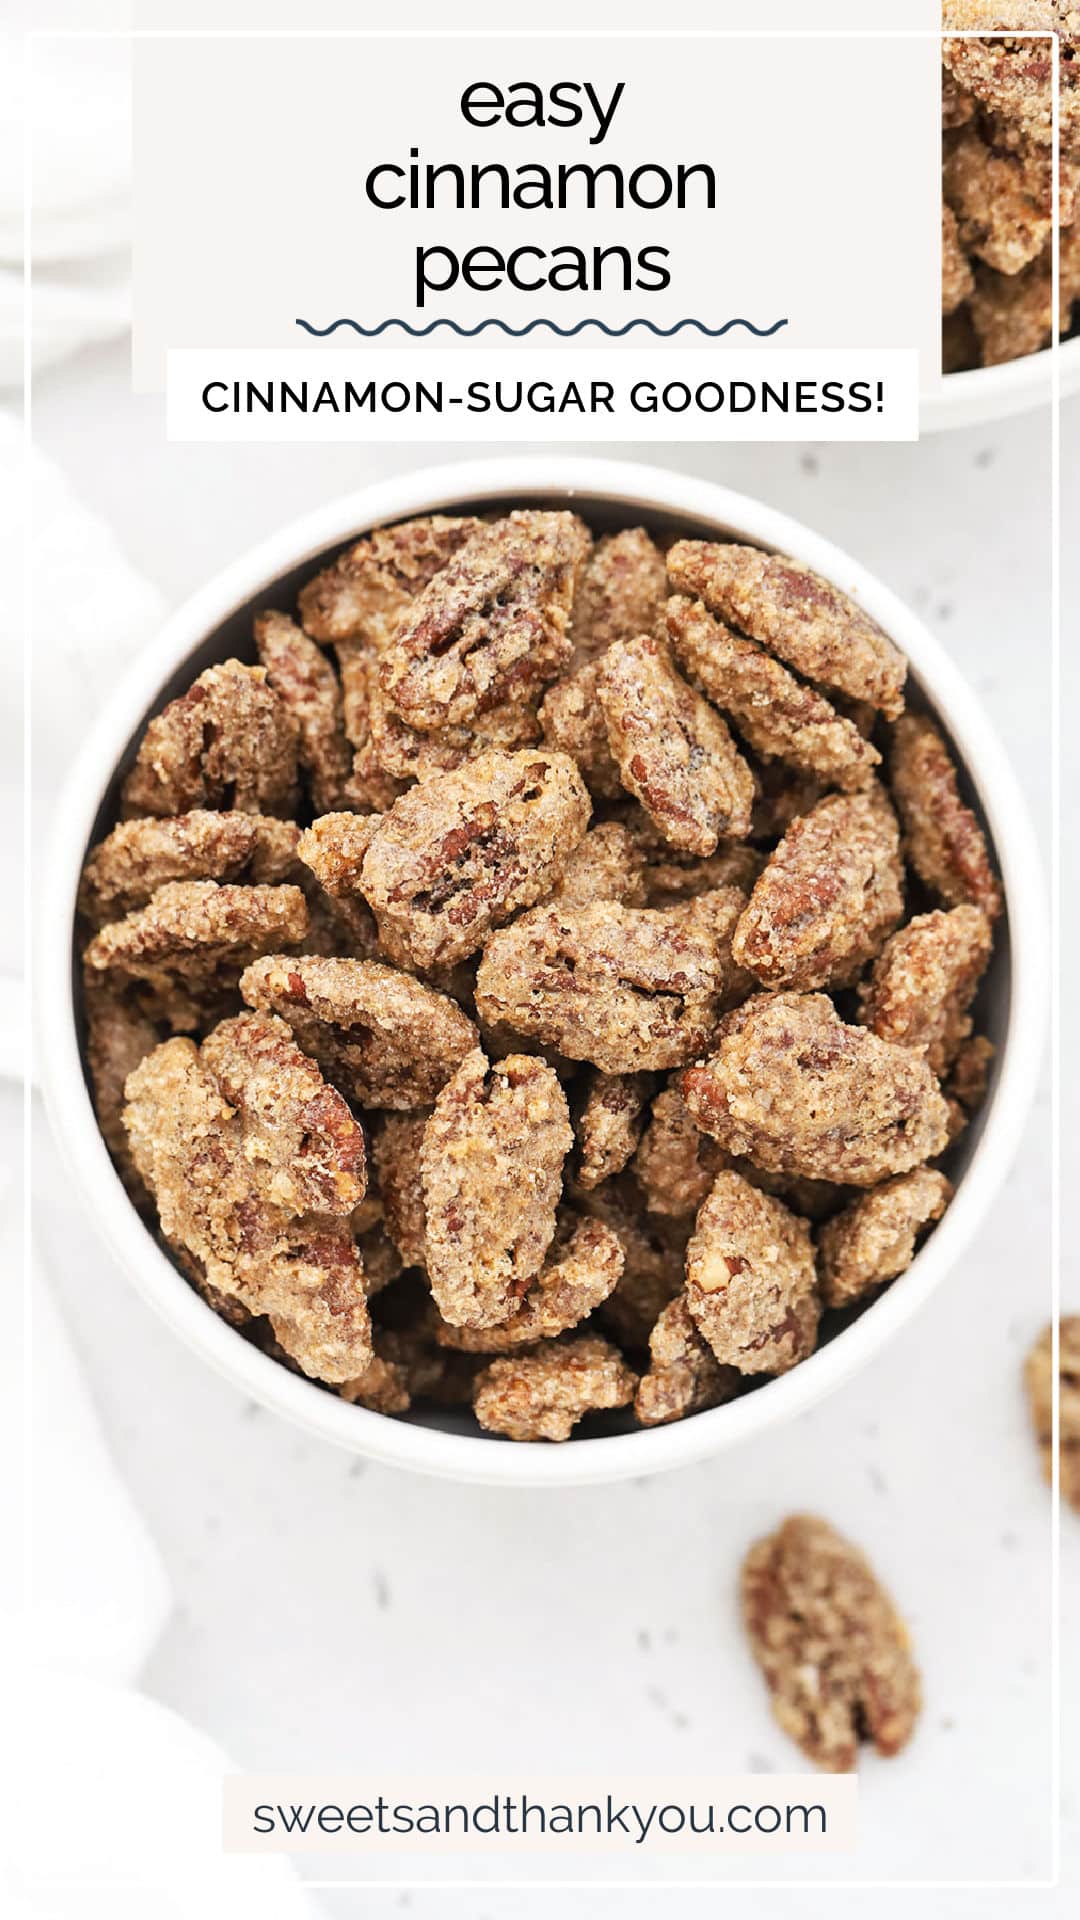 Our old-fashioned cinnamon roasted pecans recipe is so easy to make! You only need 6 ingredients and a few minutes to get started! homemade cinnamon pecans / cinnamon sugar pecans recipe / cinnamon sugar candied pecans / roasted cinnamon pecans / cinnamon sugar roasted pecans /